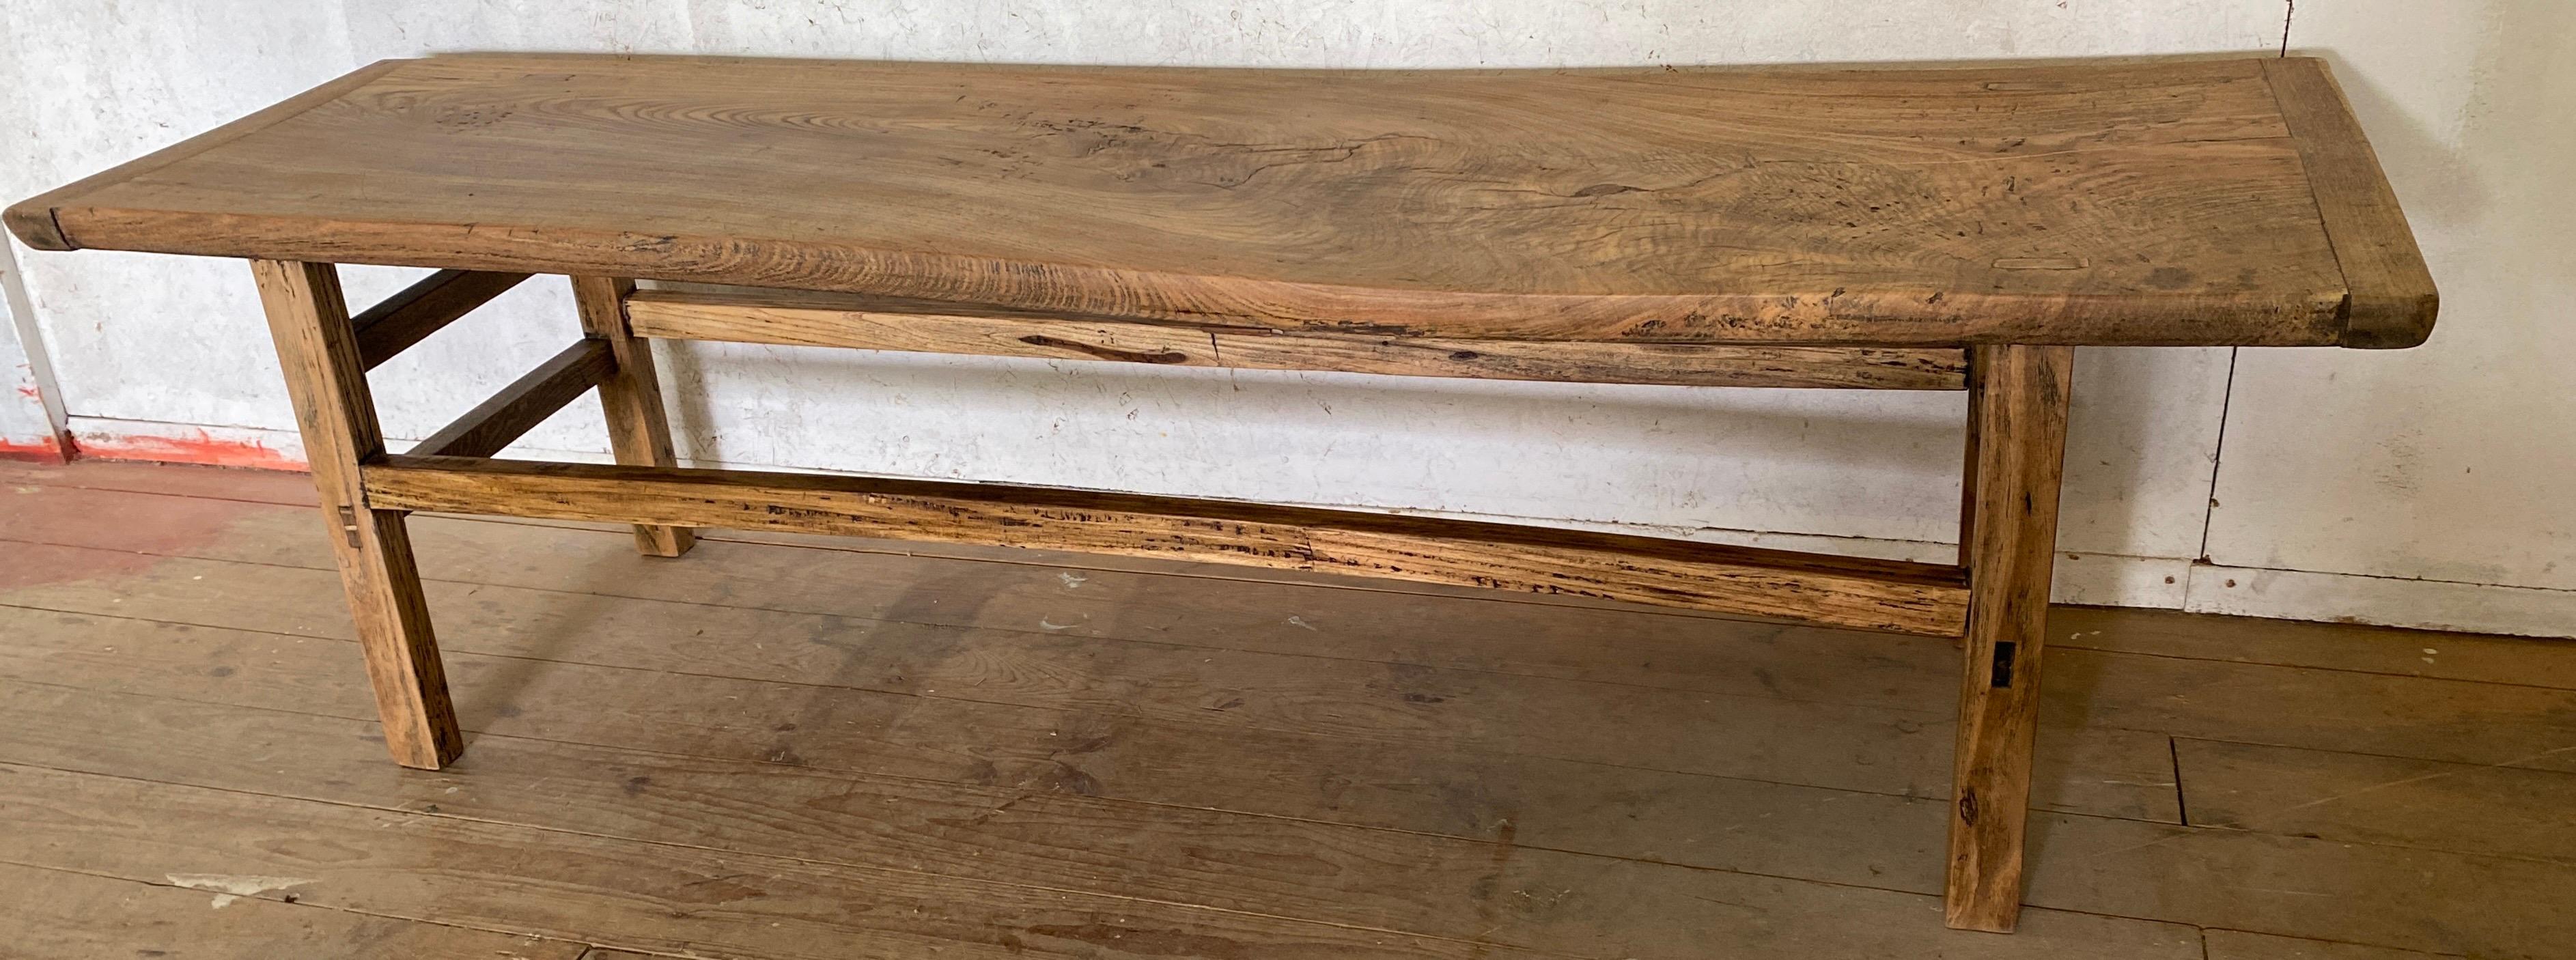 Rustic Asian Plank Top Coffee Table or Bench For Sale 1